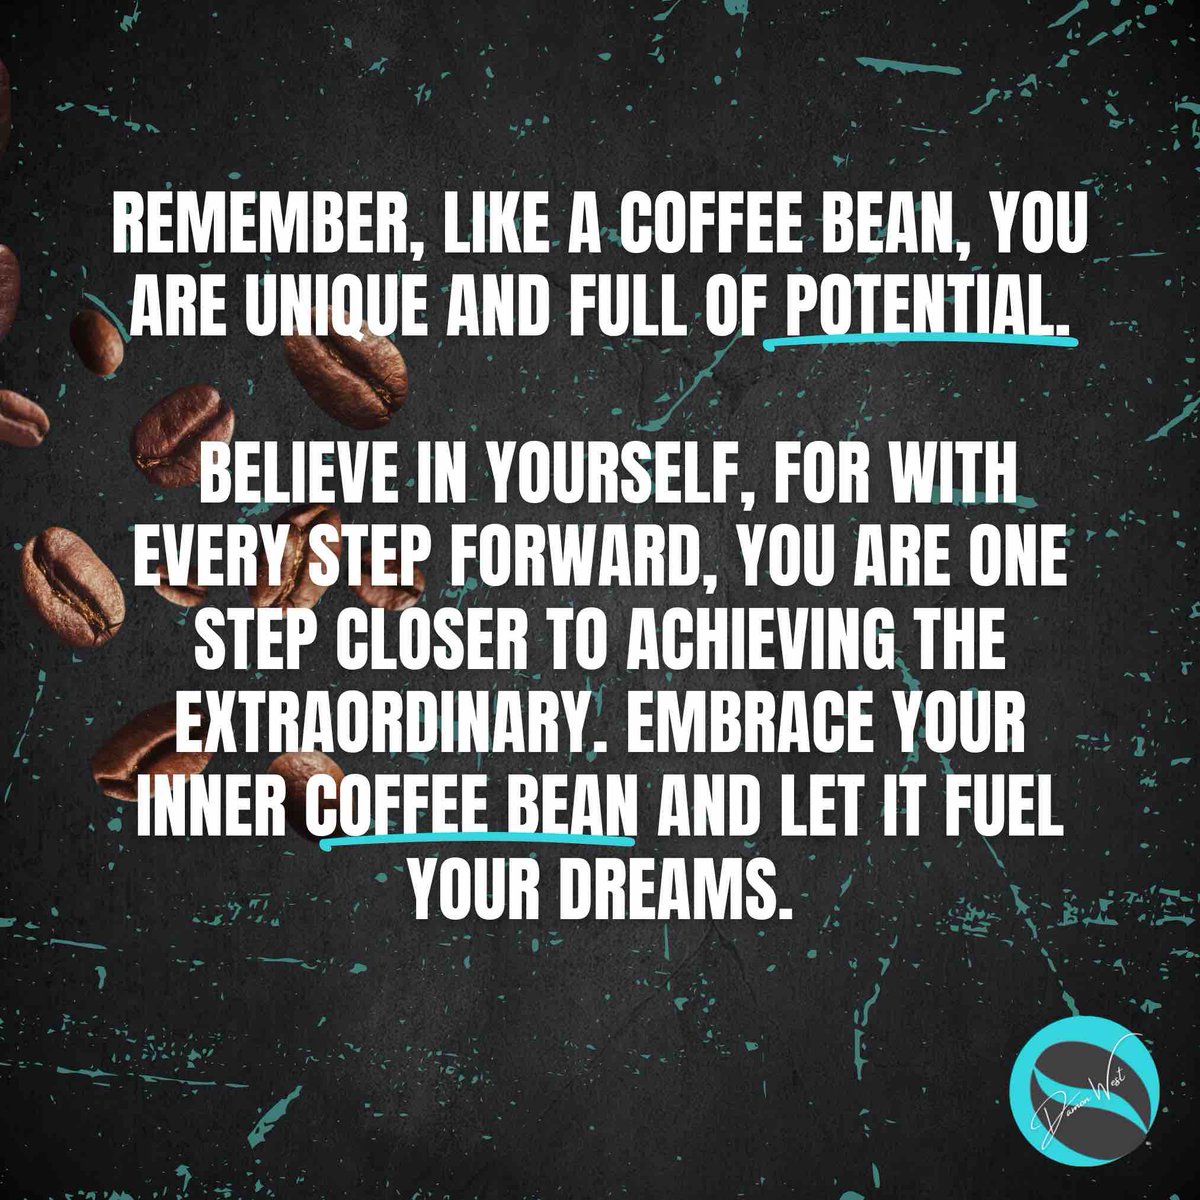 Just like the coffee bean, the power is inside YOU! Embrace that and reach for your dreams. #BeACoffeeBean #motivation #KeynoteSpeaker #ServantLeadership